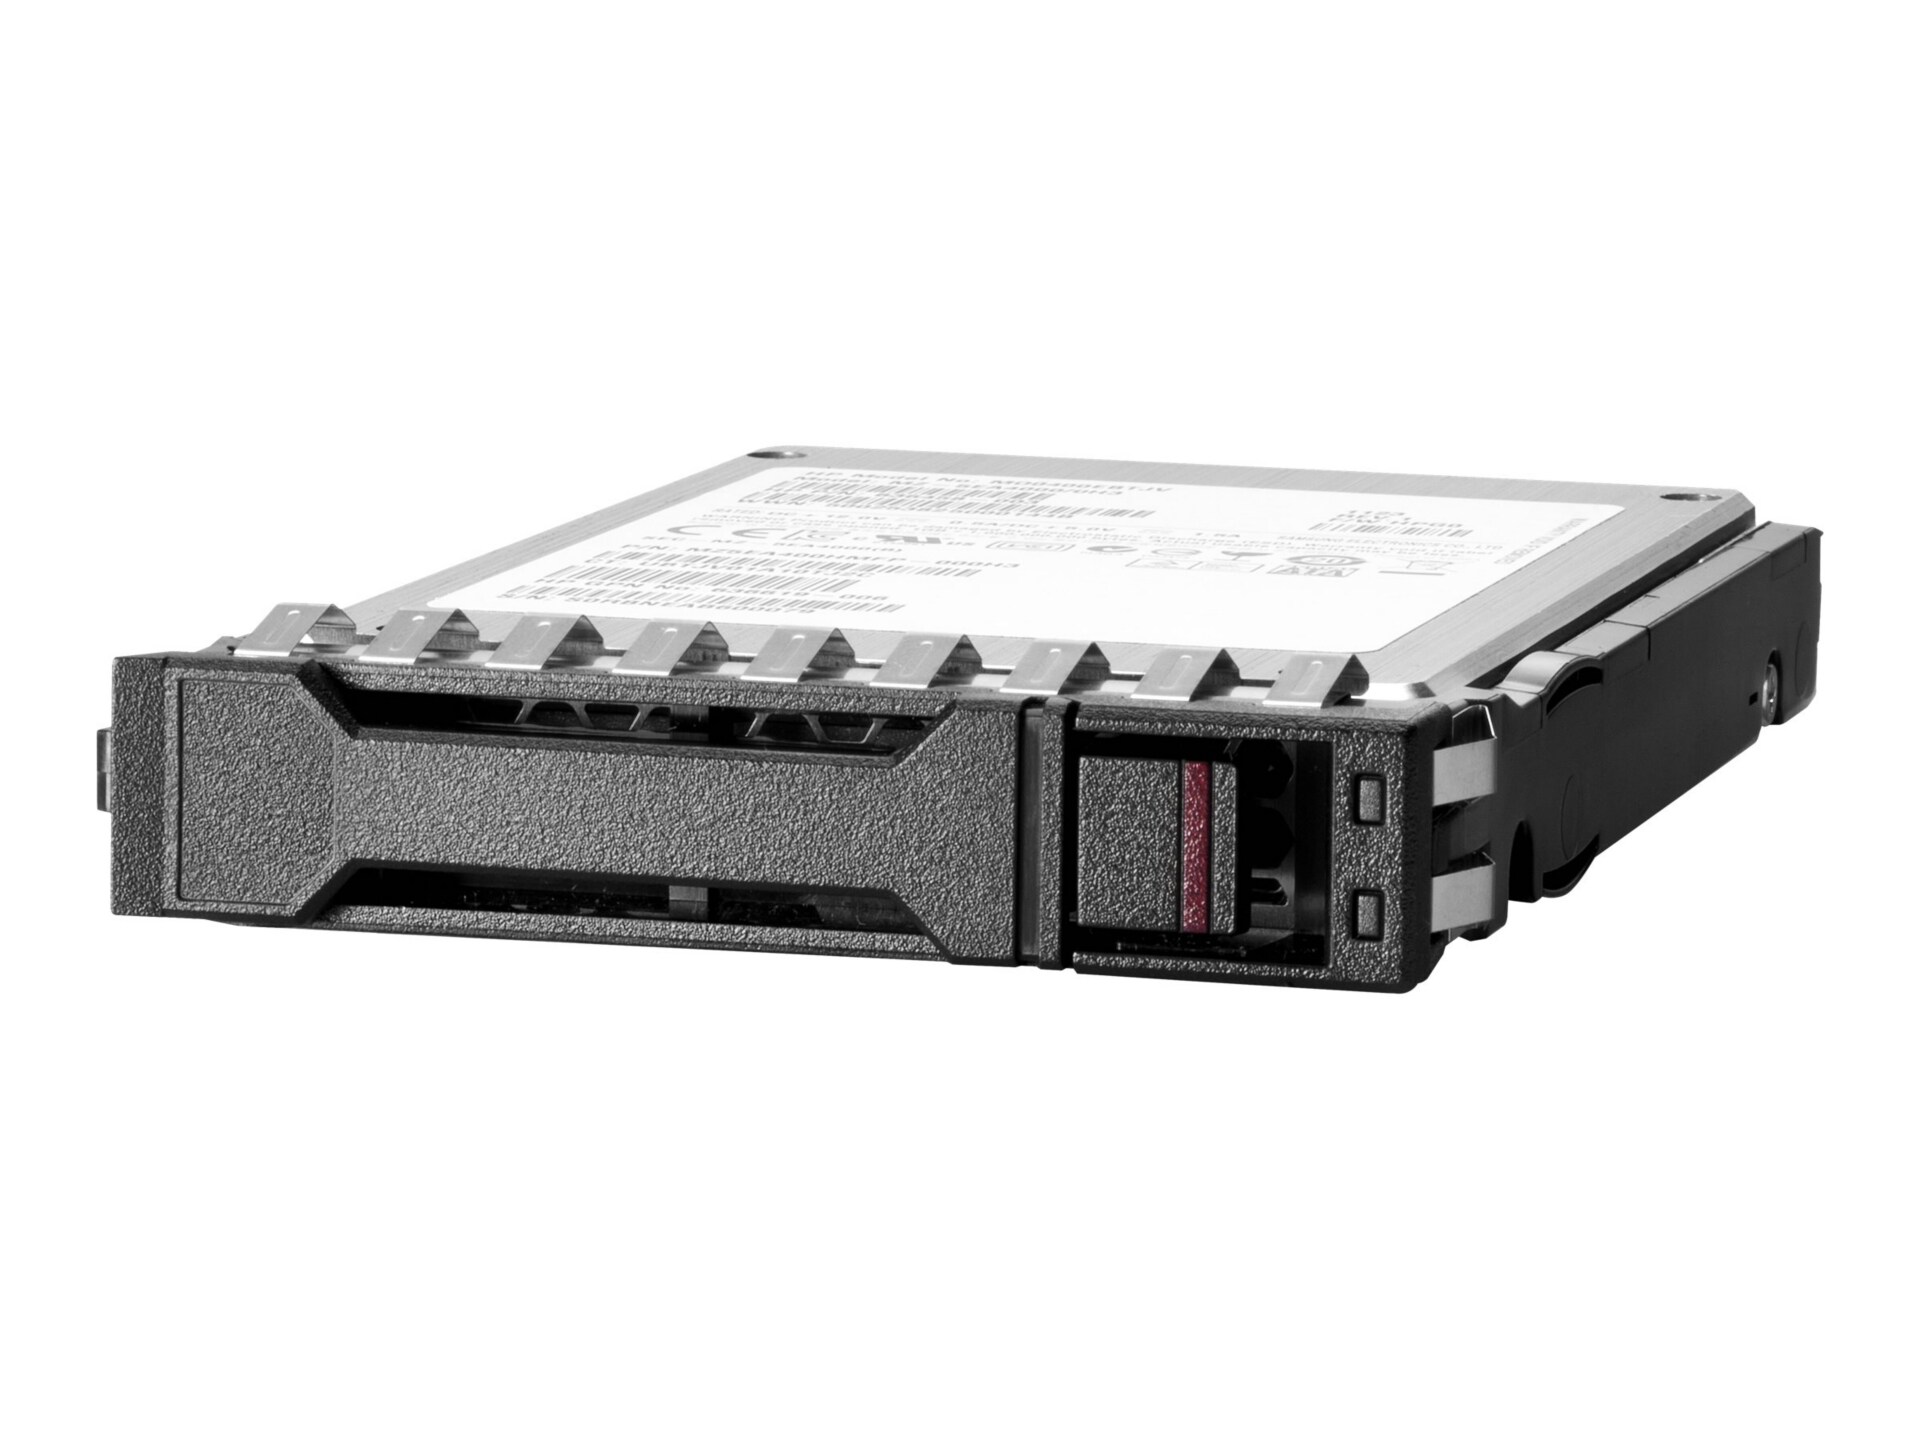 HPE Static - SSD - Mixed Use, Mainstream Performance - 1.6 TB - U.3 PCIe 4.0 (NVMe) - factory integrated